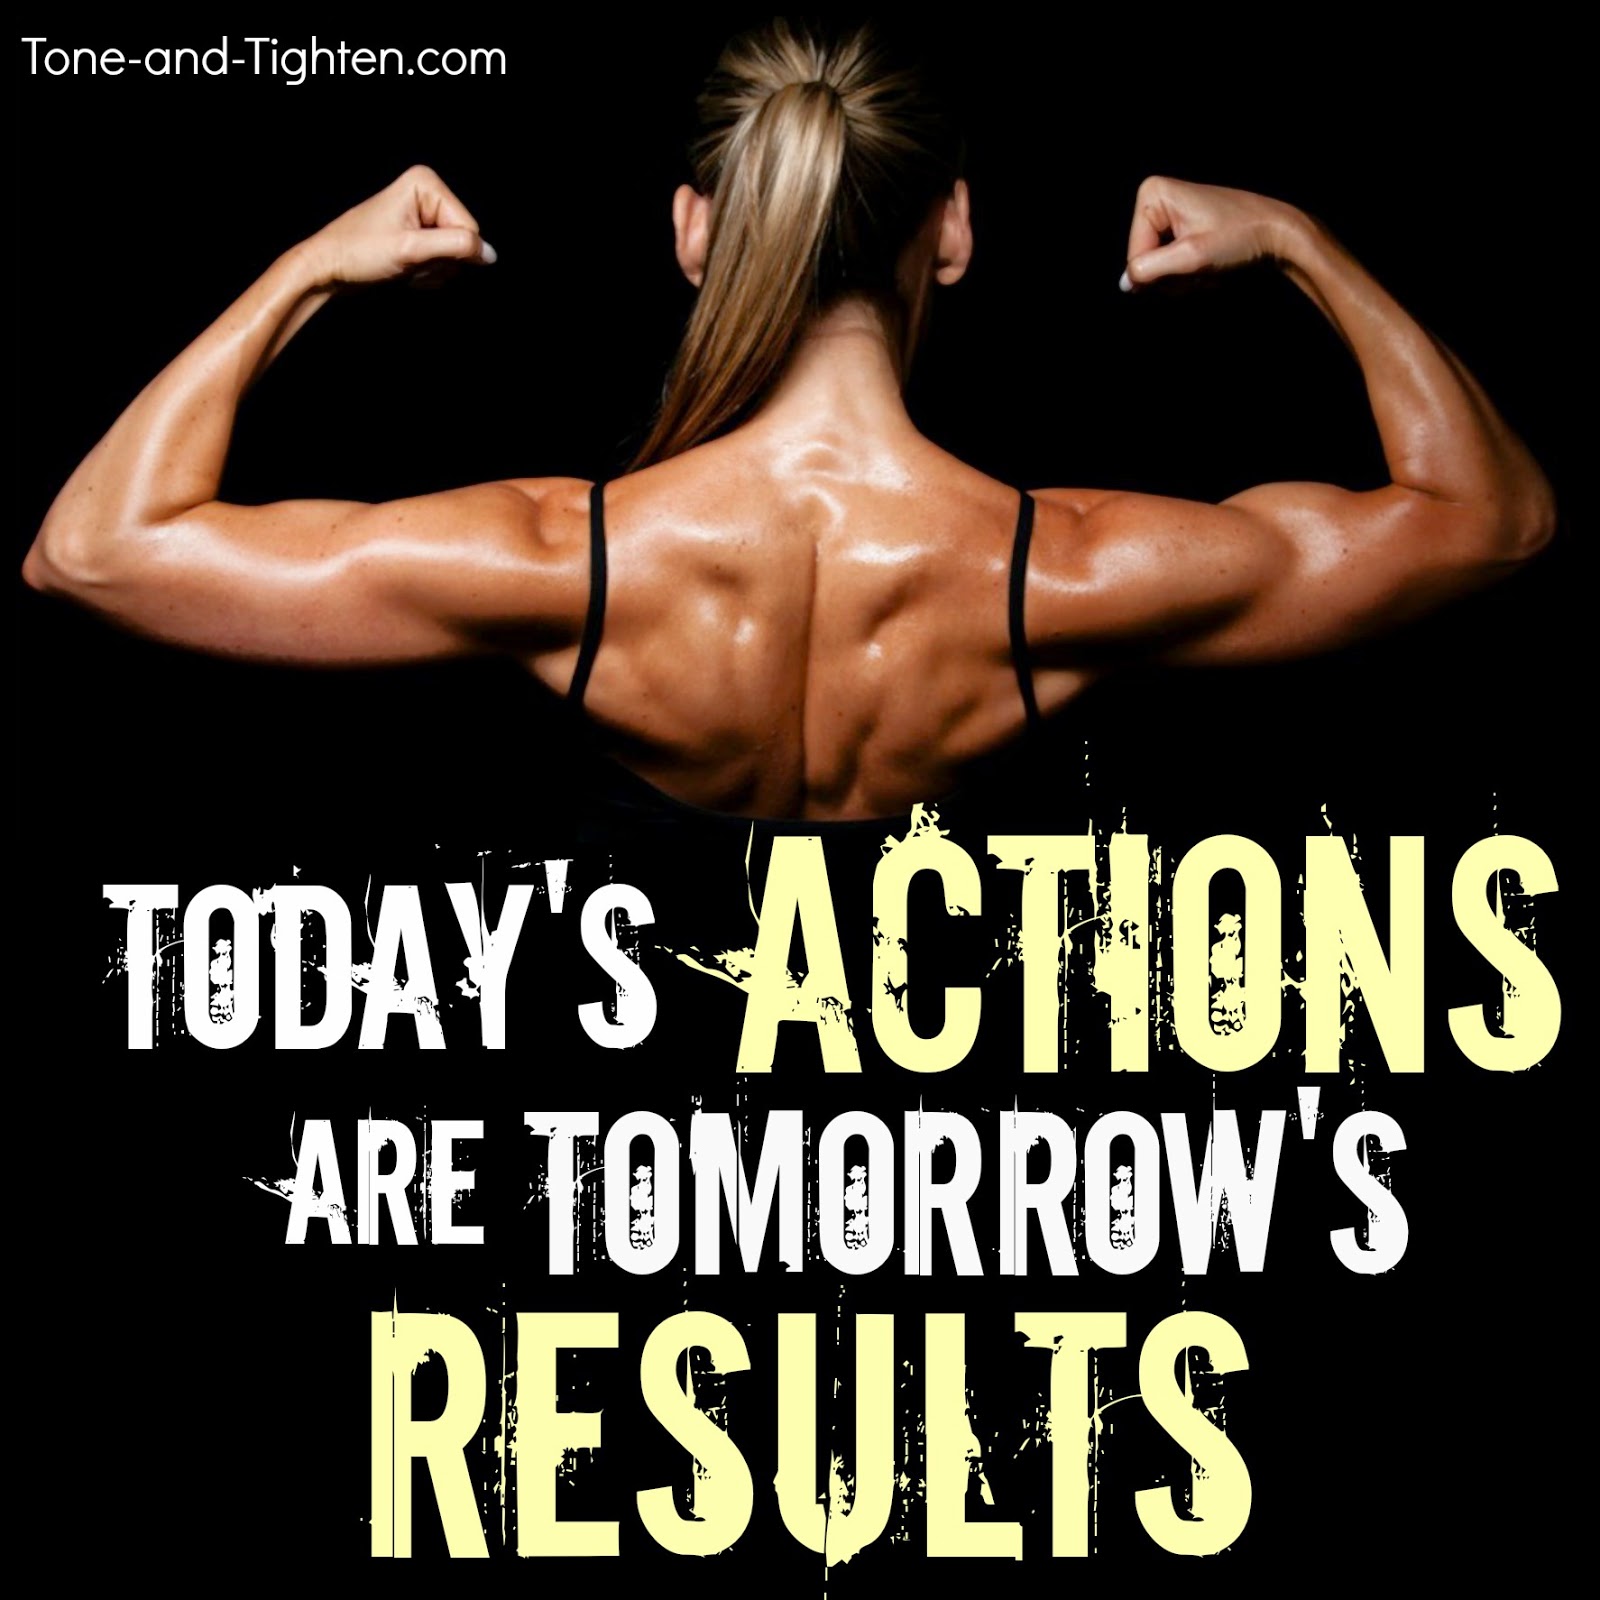 Fitness Motivation – Inspirational Fitness Quote | Tone and Tighten